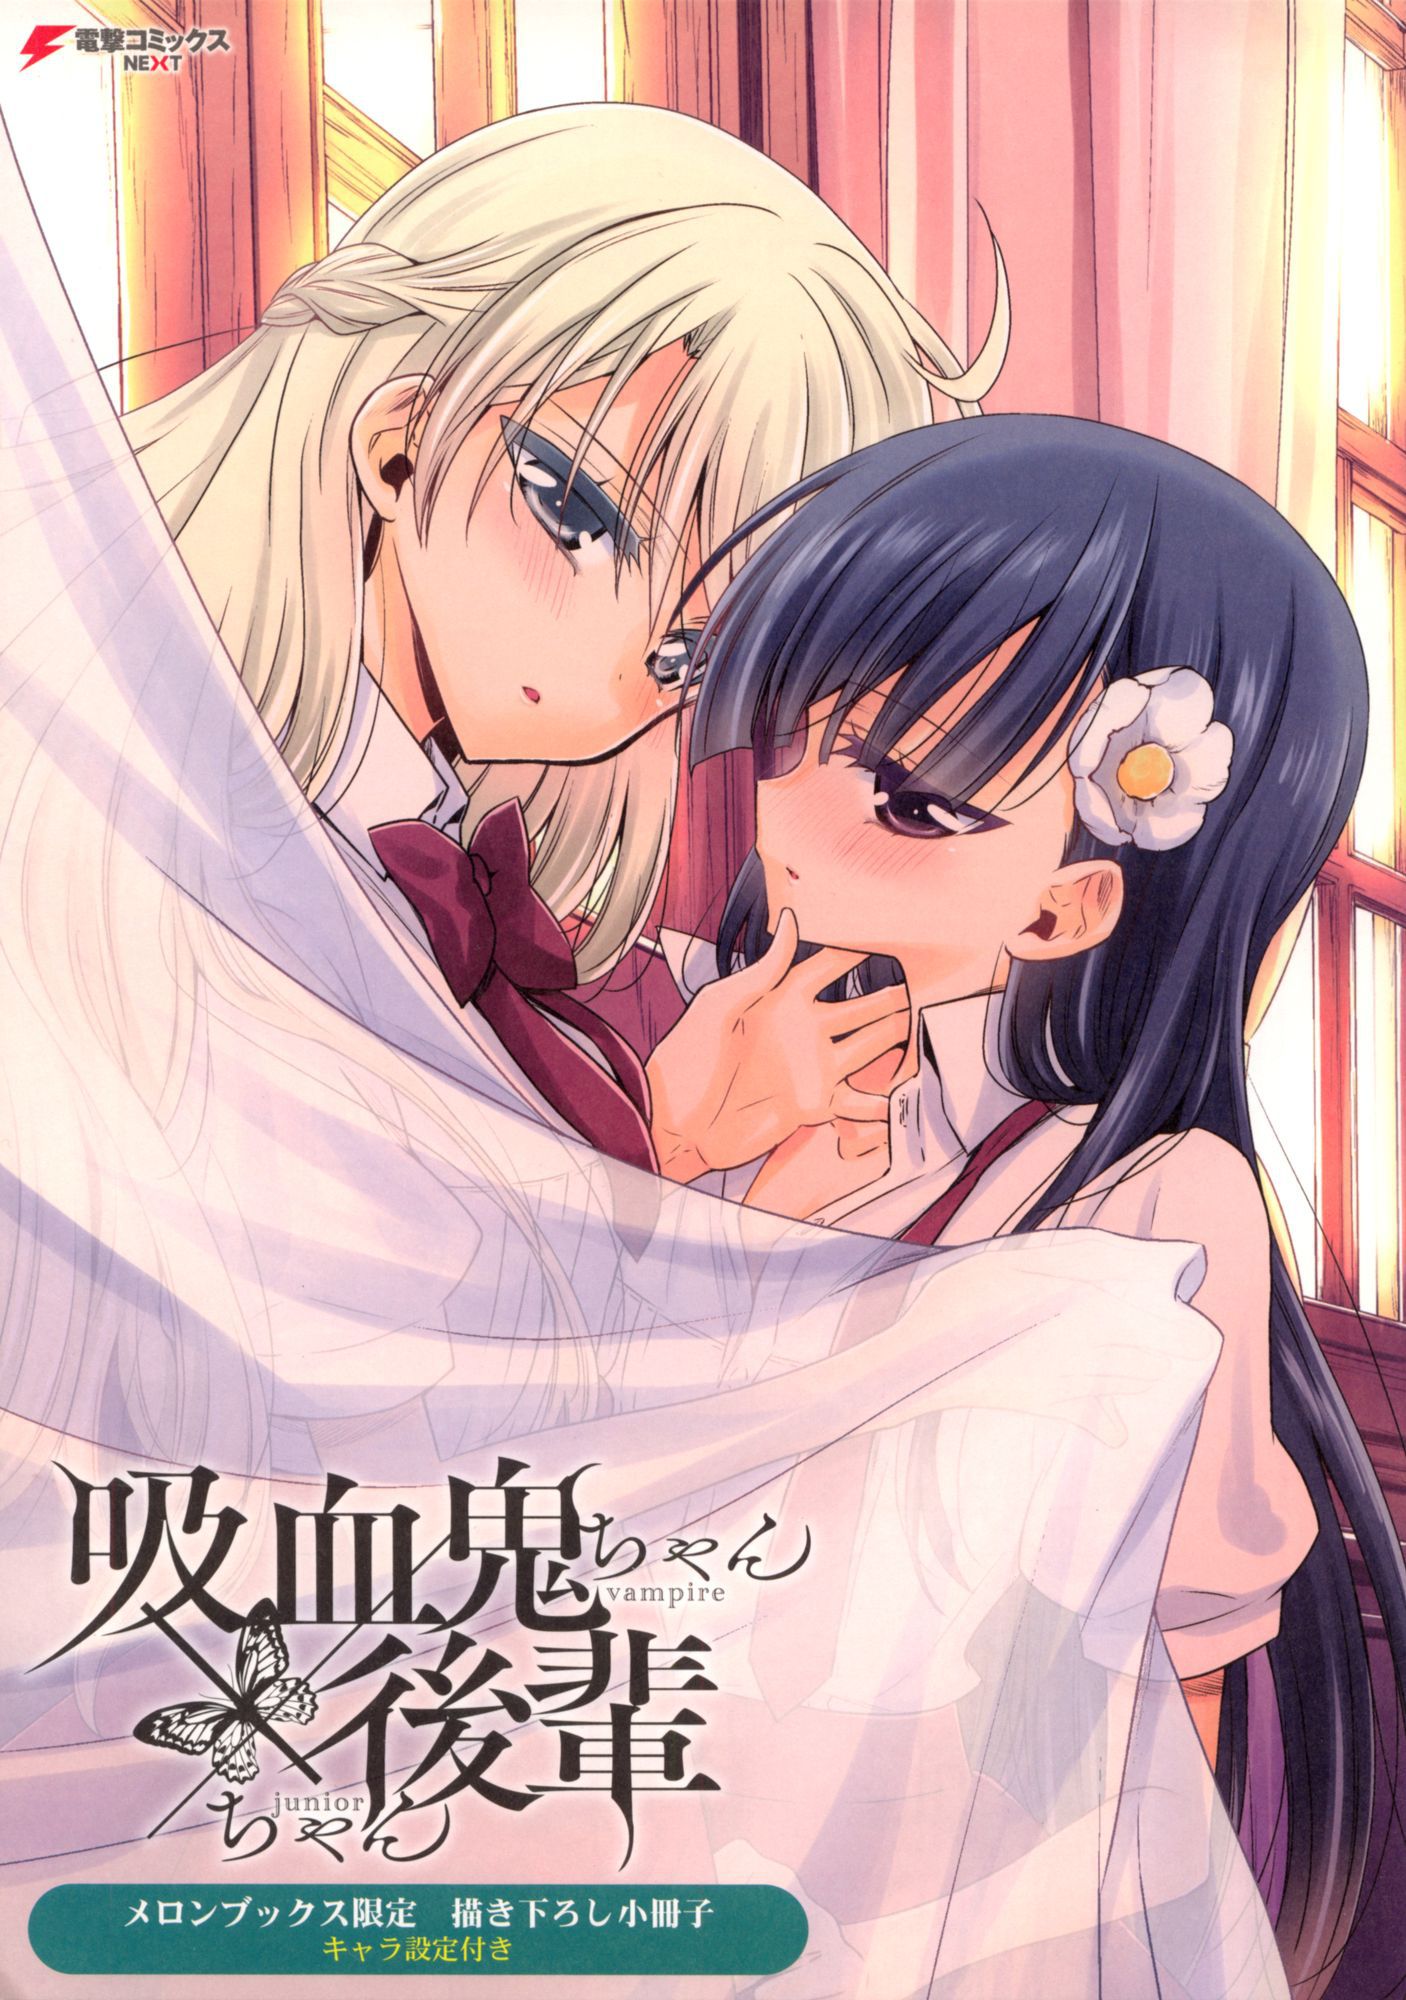 [secondary/ZIP] lovely yuri Lesbian image of a cute girl each other 17